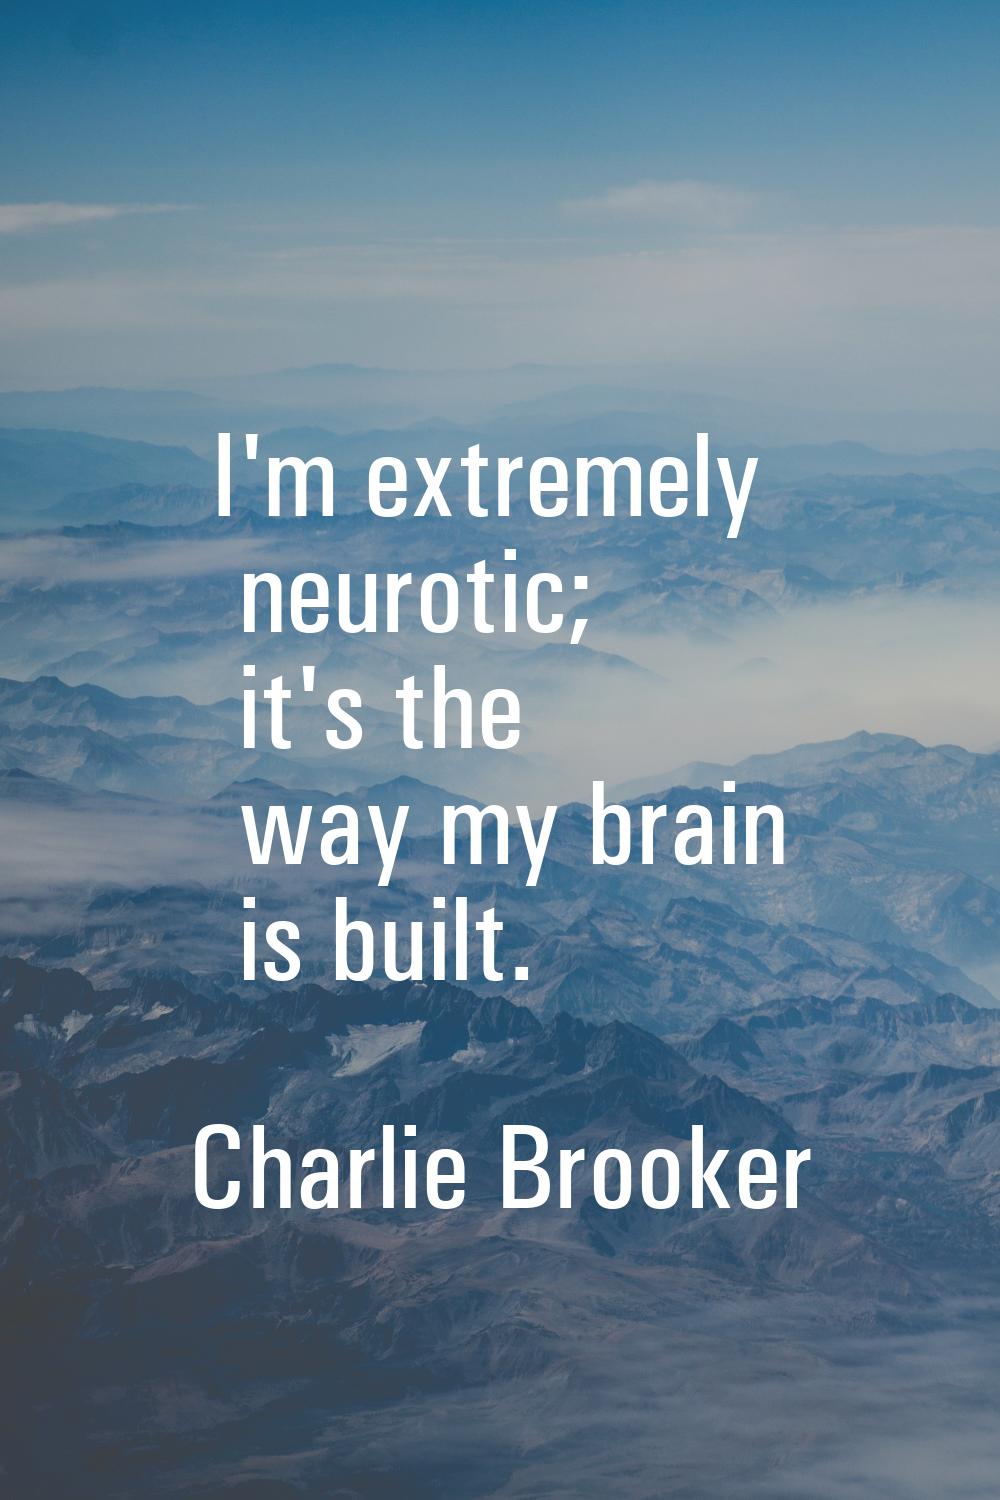 I'm extremely neurotic; it's the way my brain is built.